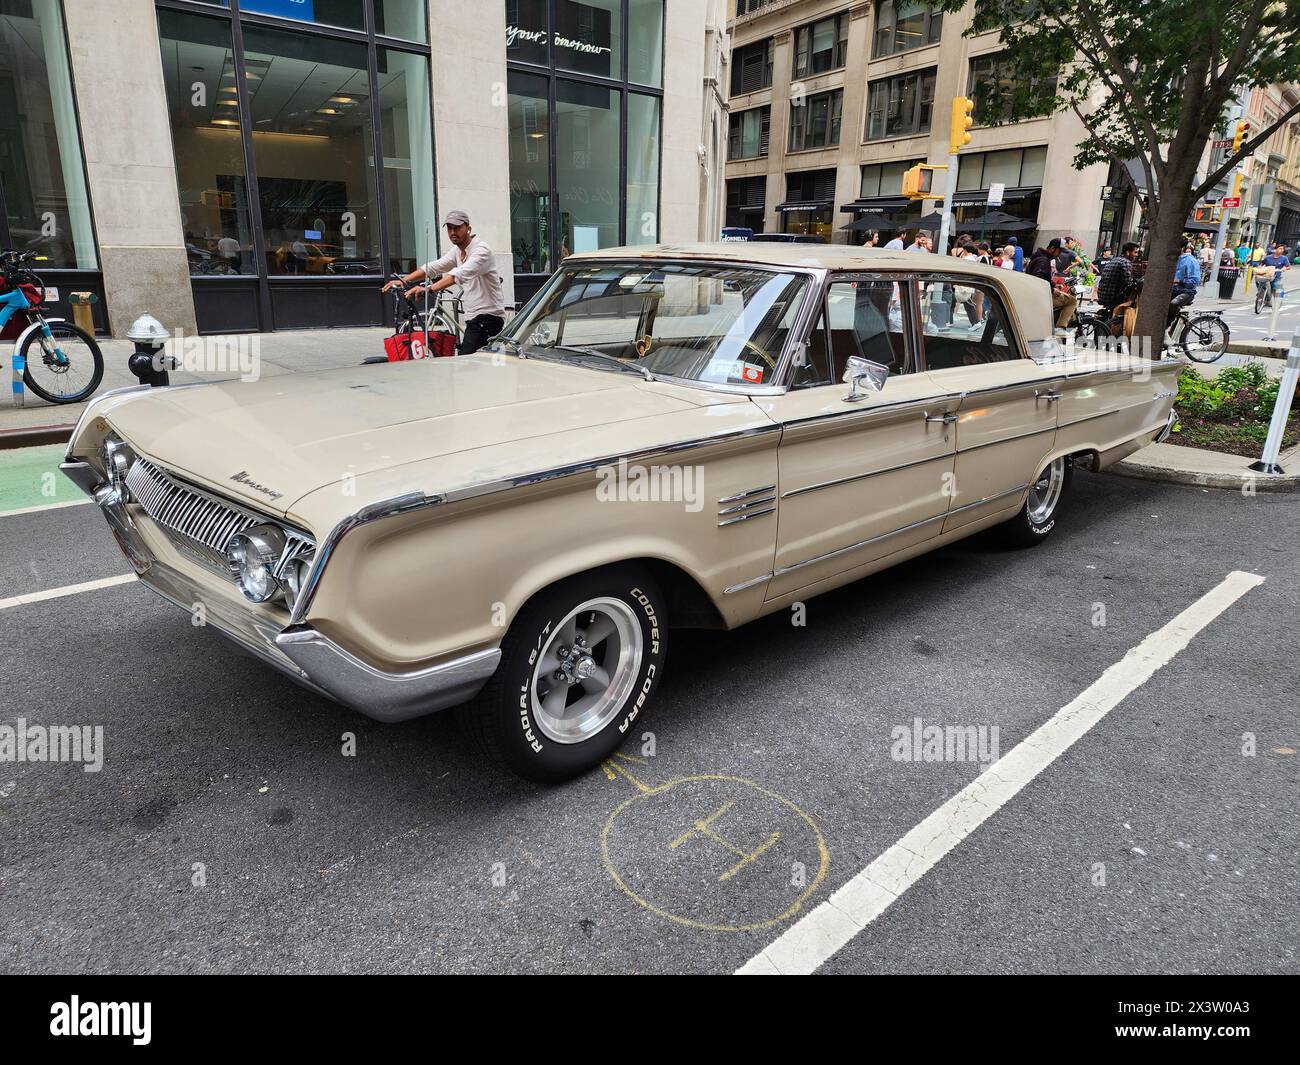 New York City, USA - August 17, 2023: Mercury Montclair 1964 vintage car parked at the street, side corner view Stock Photo